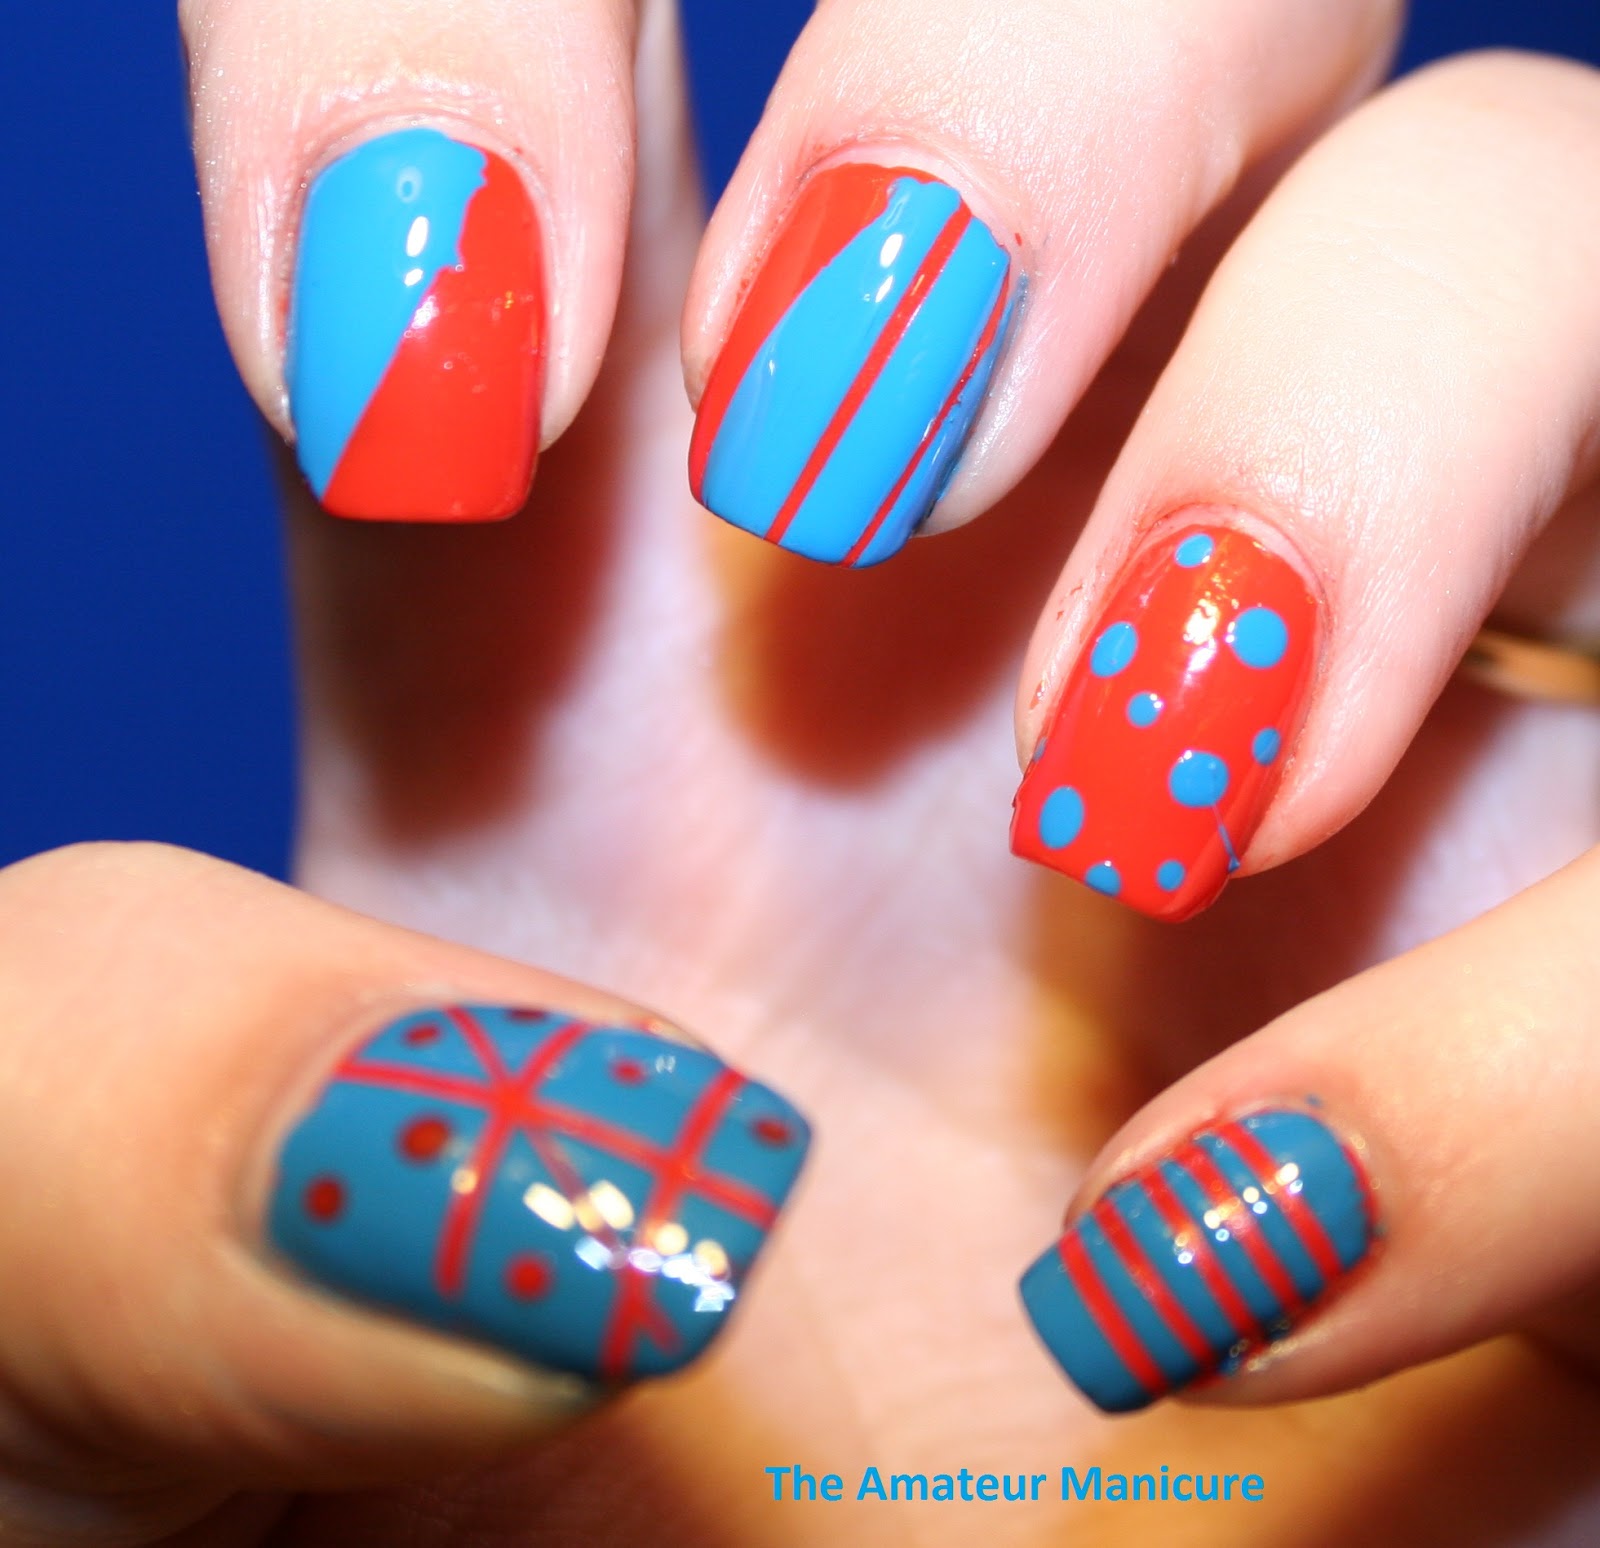 The Amateur Manicure: Day 16 31DC - Color Opposites